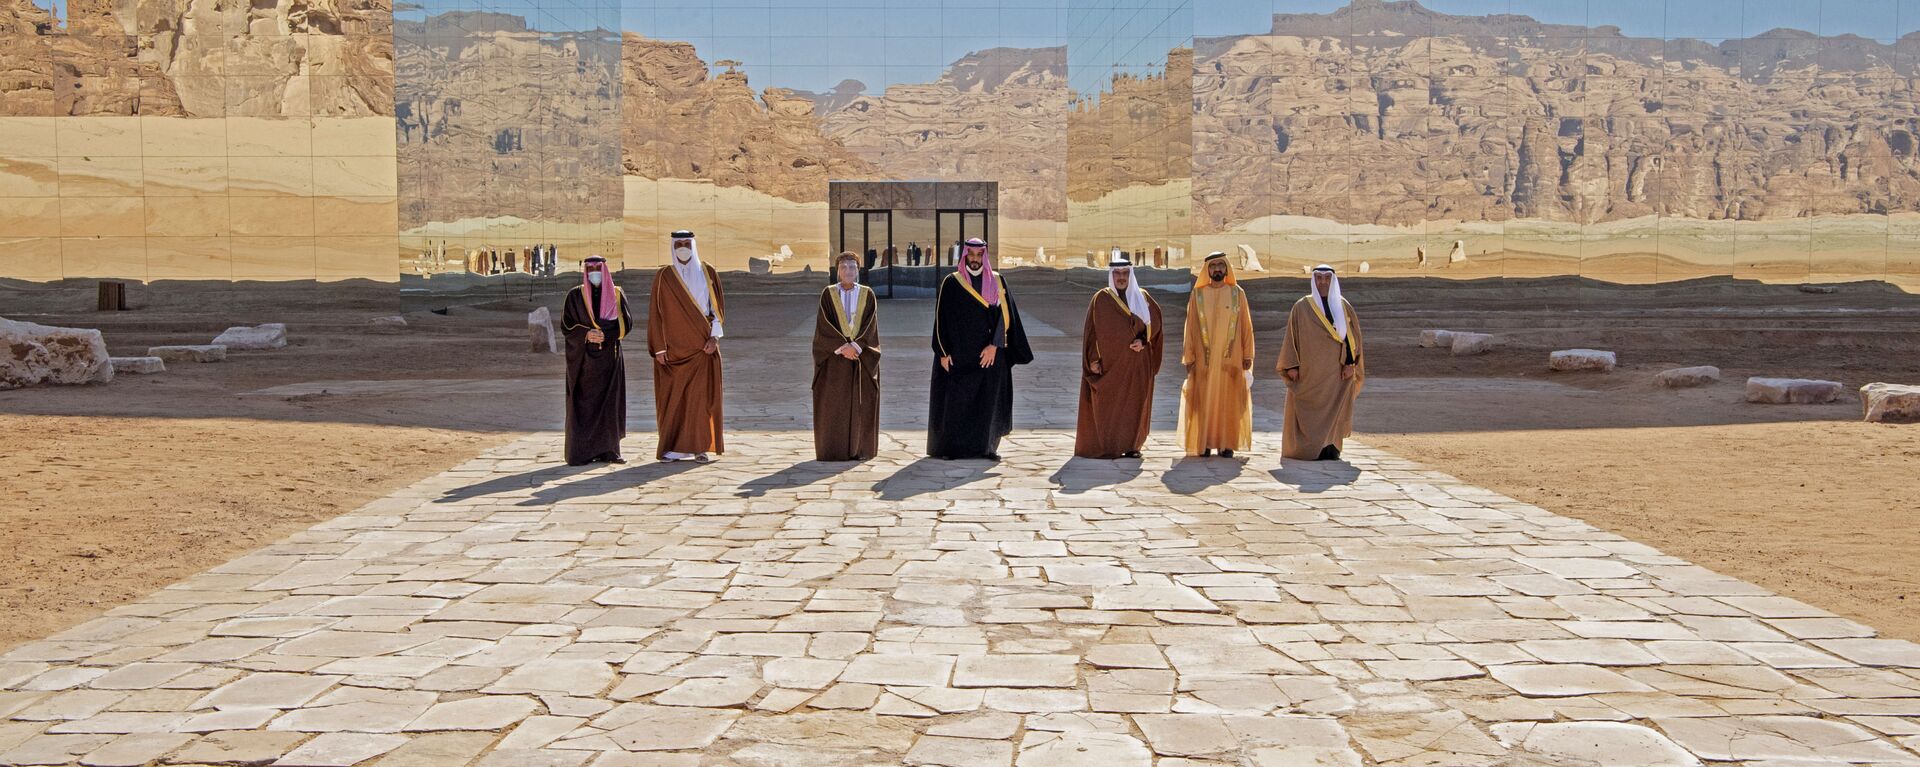 A handout picture provided by the Saudi Royal Palace on January 5, 2021, shows from L to R: Kuwaiti Emir Sheikh Nawaf al-Ahmad Al-Sabah, Emir of Qatar Tamim bin Hamad Al-Thani, Omani Deputy Prime Minister Fahd Bin Mahmud, Saudi Crown Prince Mohammed bin Salman, Bahrain's Crown Prince Salman bin Hamad Al-Khalifa, Dubai's Ruler and UAE Vice President Sheikh Mohammed bin Rashid Al-Maktoum and Nayef al-Hajraf, secretary-general of the Gulf Cooperation Council (GCC) posing for a pictures before the opening session of the 41st Gulf Cooperation Council (GCC) summit in the northwestern Saudi city of al-Ula. - Saudi Arabia's Crown Prince Mohammed bin Salman said that the Gulf states had signed an agreement on regional solidarity and stability at a summit aimed at resolving a three-year embargo against Qatar.  - Sputnik International, 1920, 26.06.2022